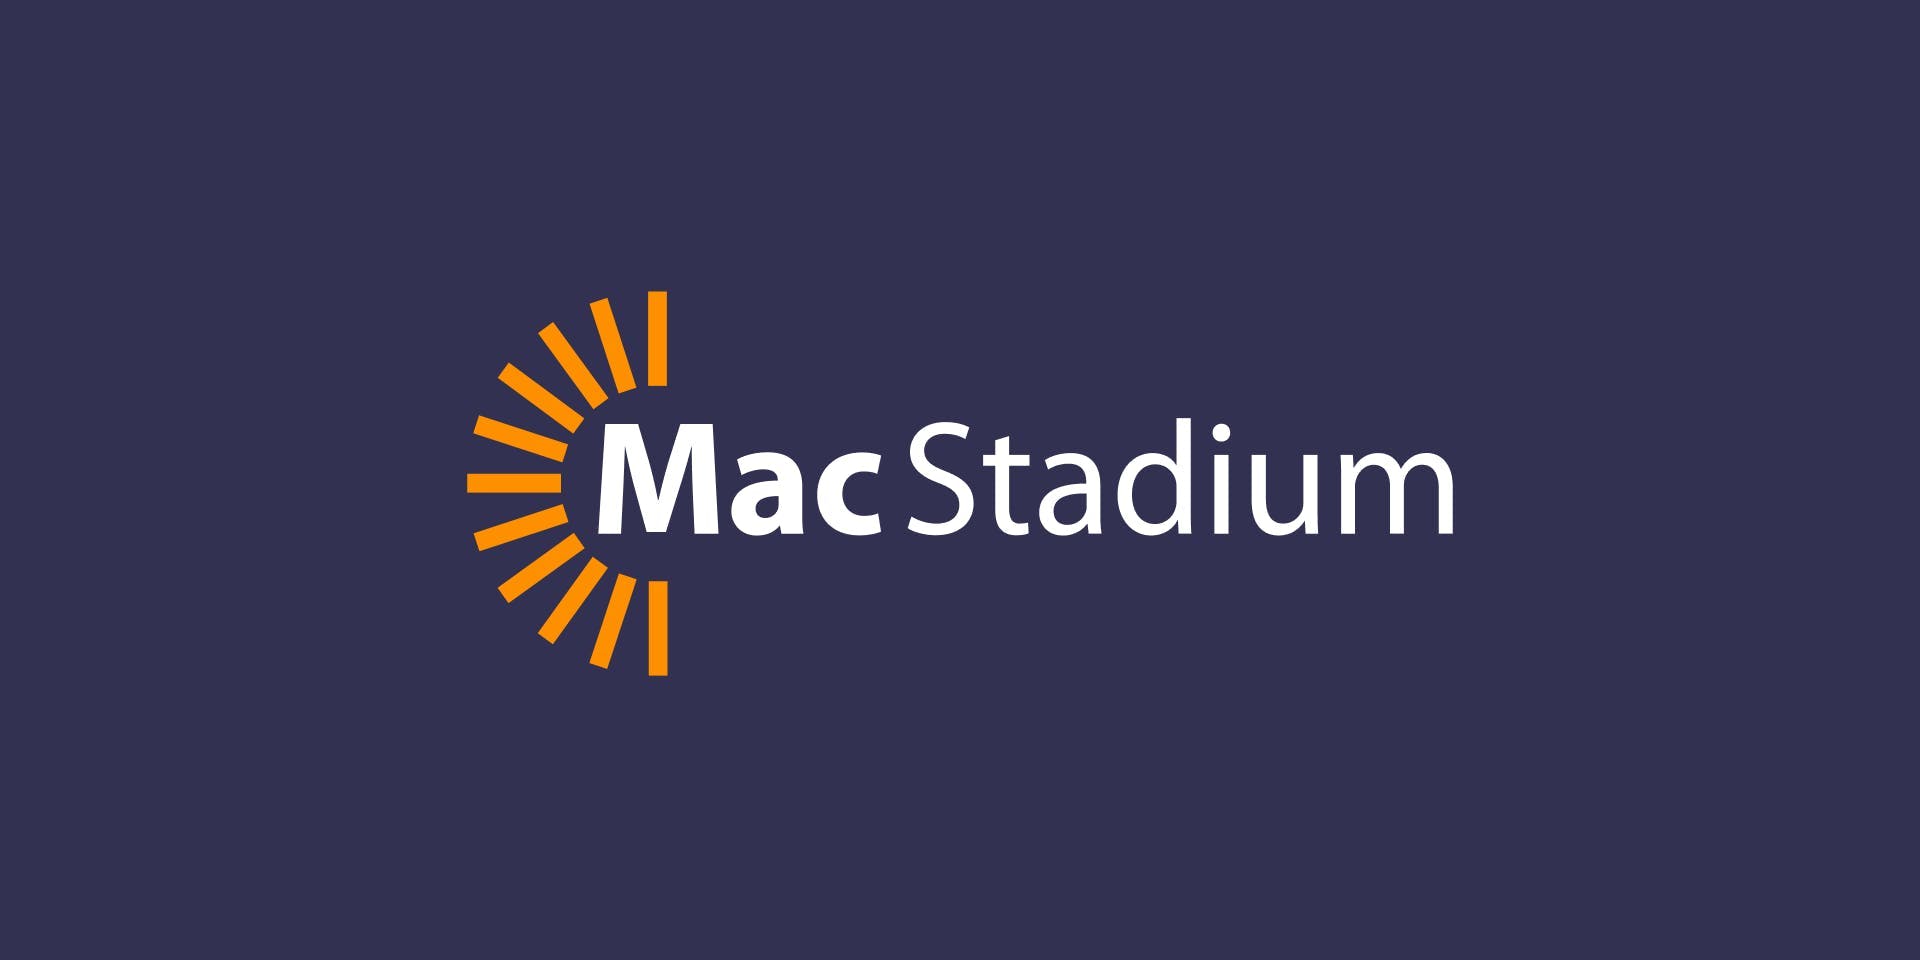 MacStadium Announces Inaugural User Conference, Showcases World Class Enterprise Mac Virtualization and Cloud Solutions for macOS